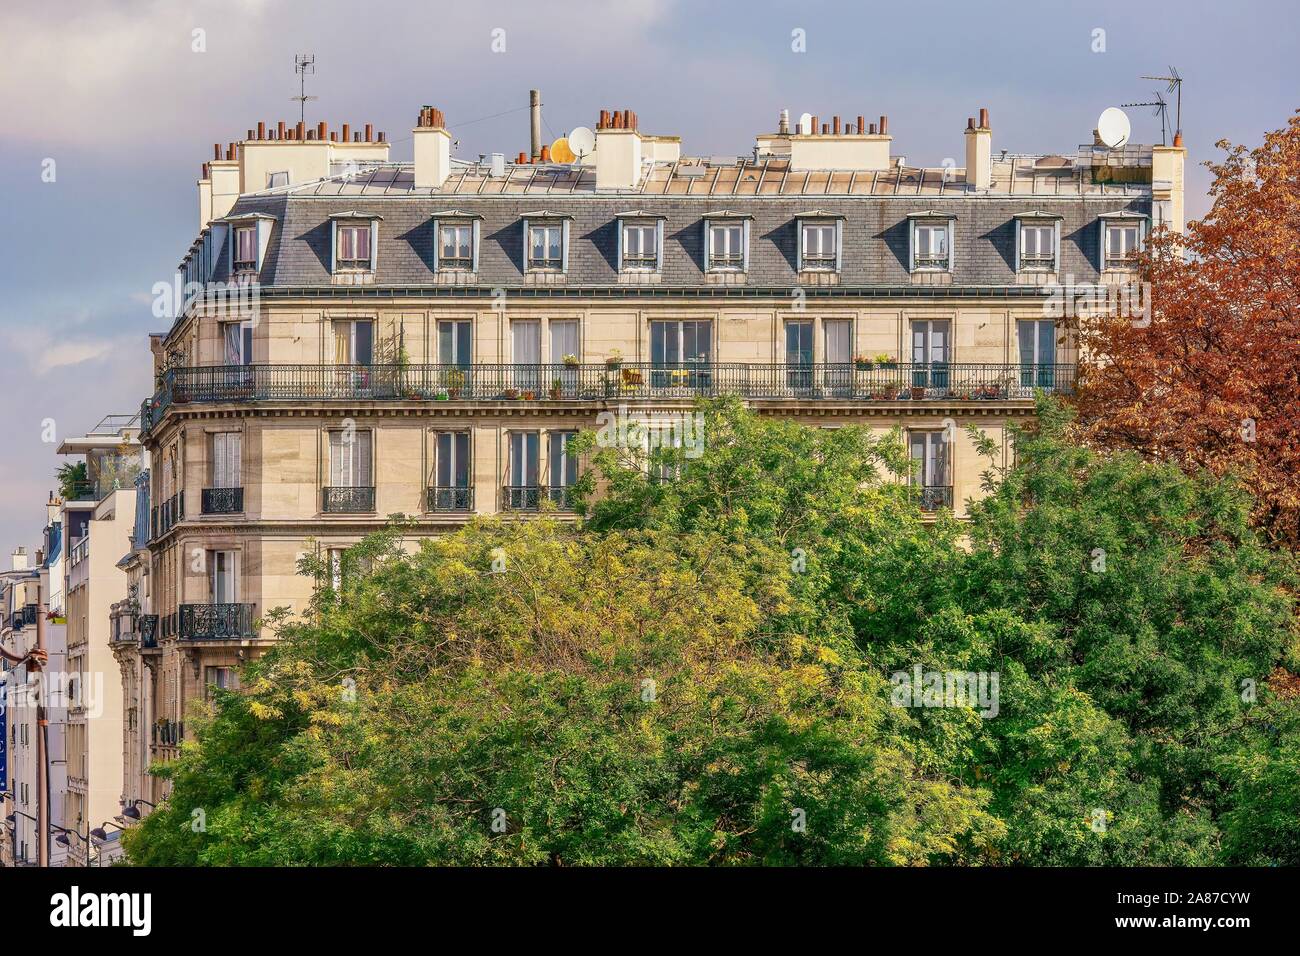 A traditional Parisian apartment building in a residential neighborhood, with large trees adding nature to the urban setting. Stock Photo